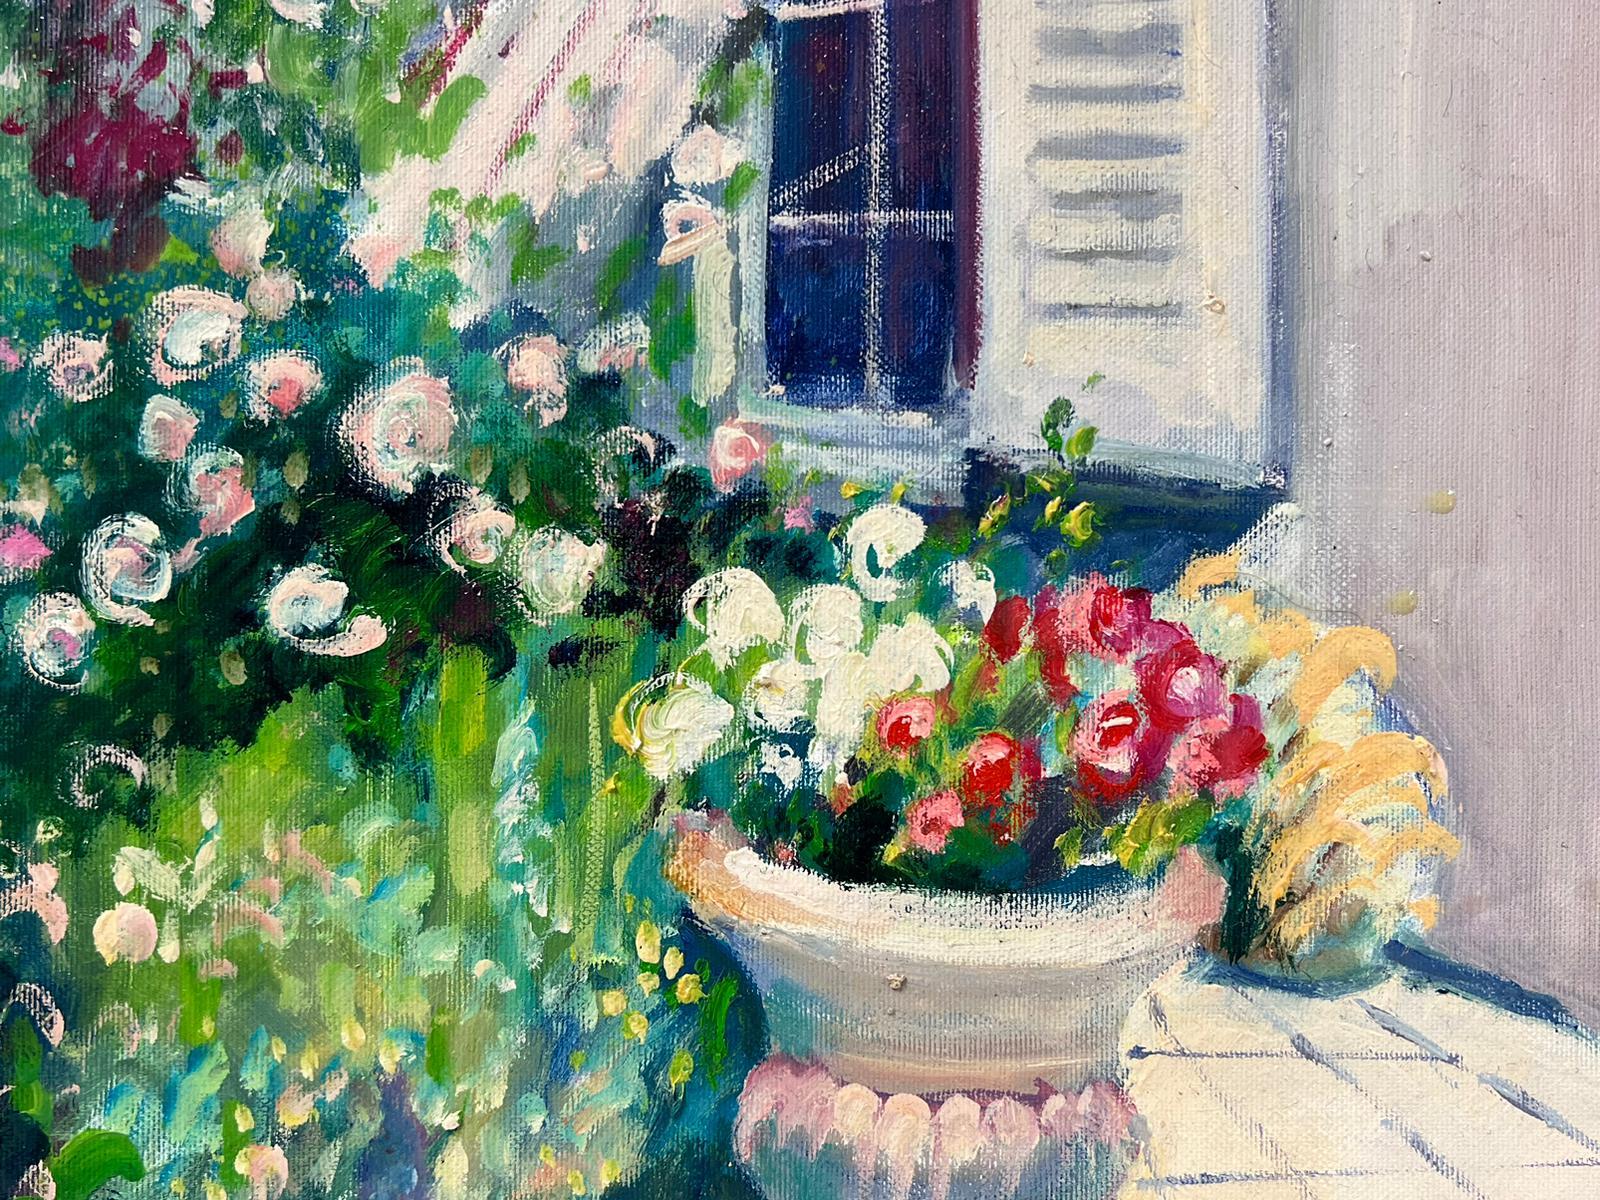 Artist/ School: Guy Benard (French b.1928) signed lower corner. Painter from Rouen, Normandy, exhibited throughout France. 

Title: Jardin du Peintre

Medium:  signed oil on canvas, unframed and inscribed verso

size: 18 x 21.5 inches

Provenance: